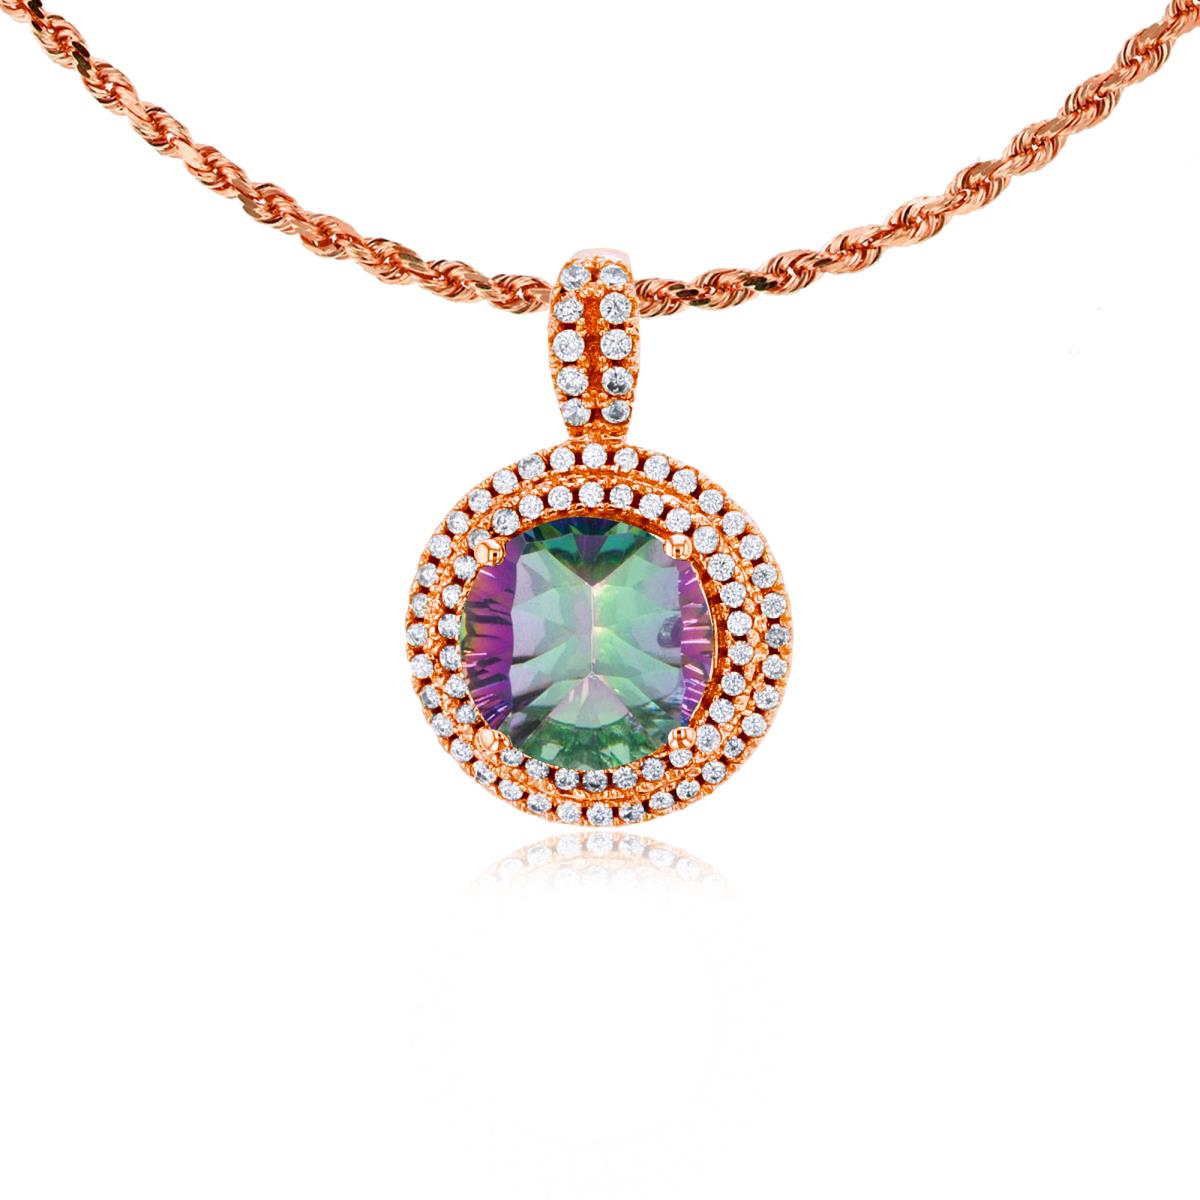 10K Rose Gold 7mm Round Mystic Green Topaz & 0.25 CTTW Diamonds Double Halo 18" Rope Chain Necklace